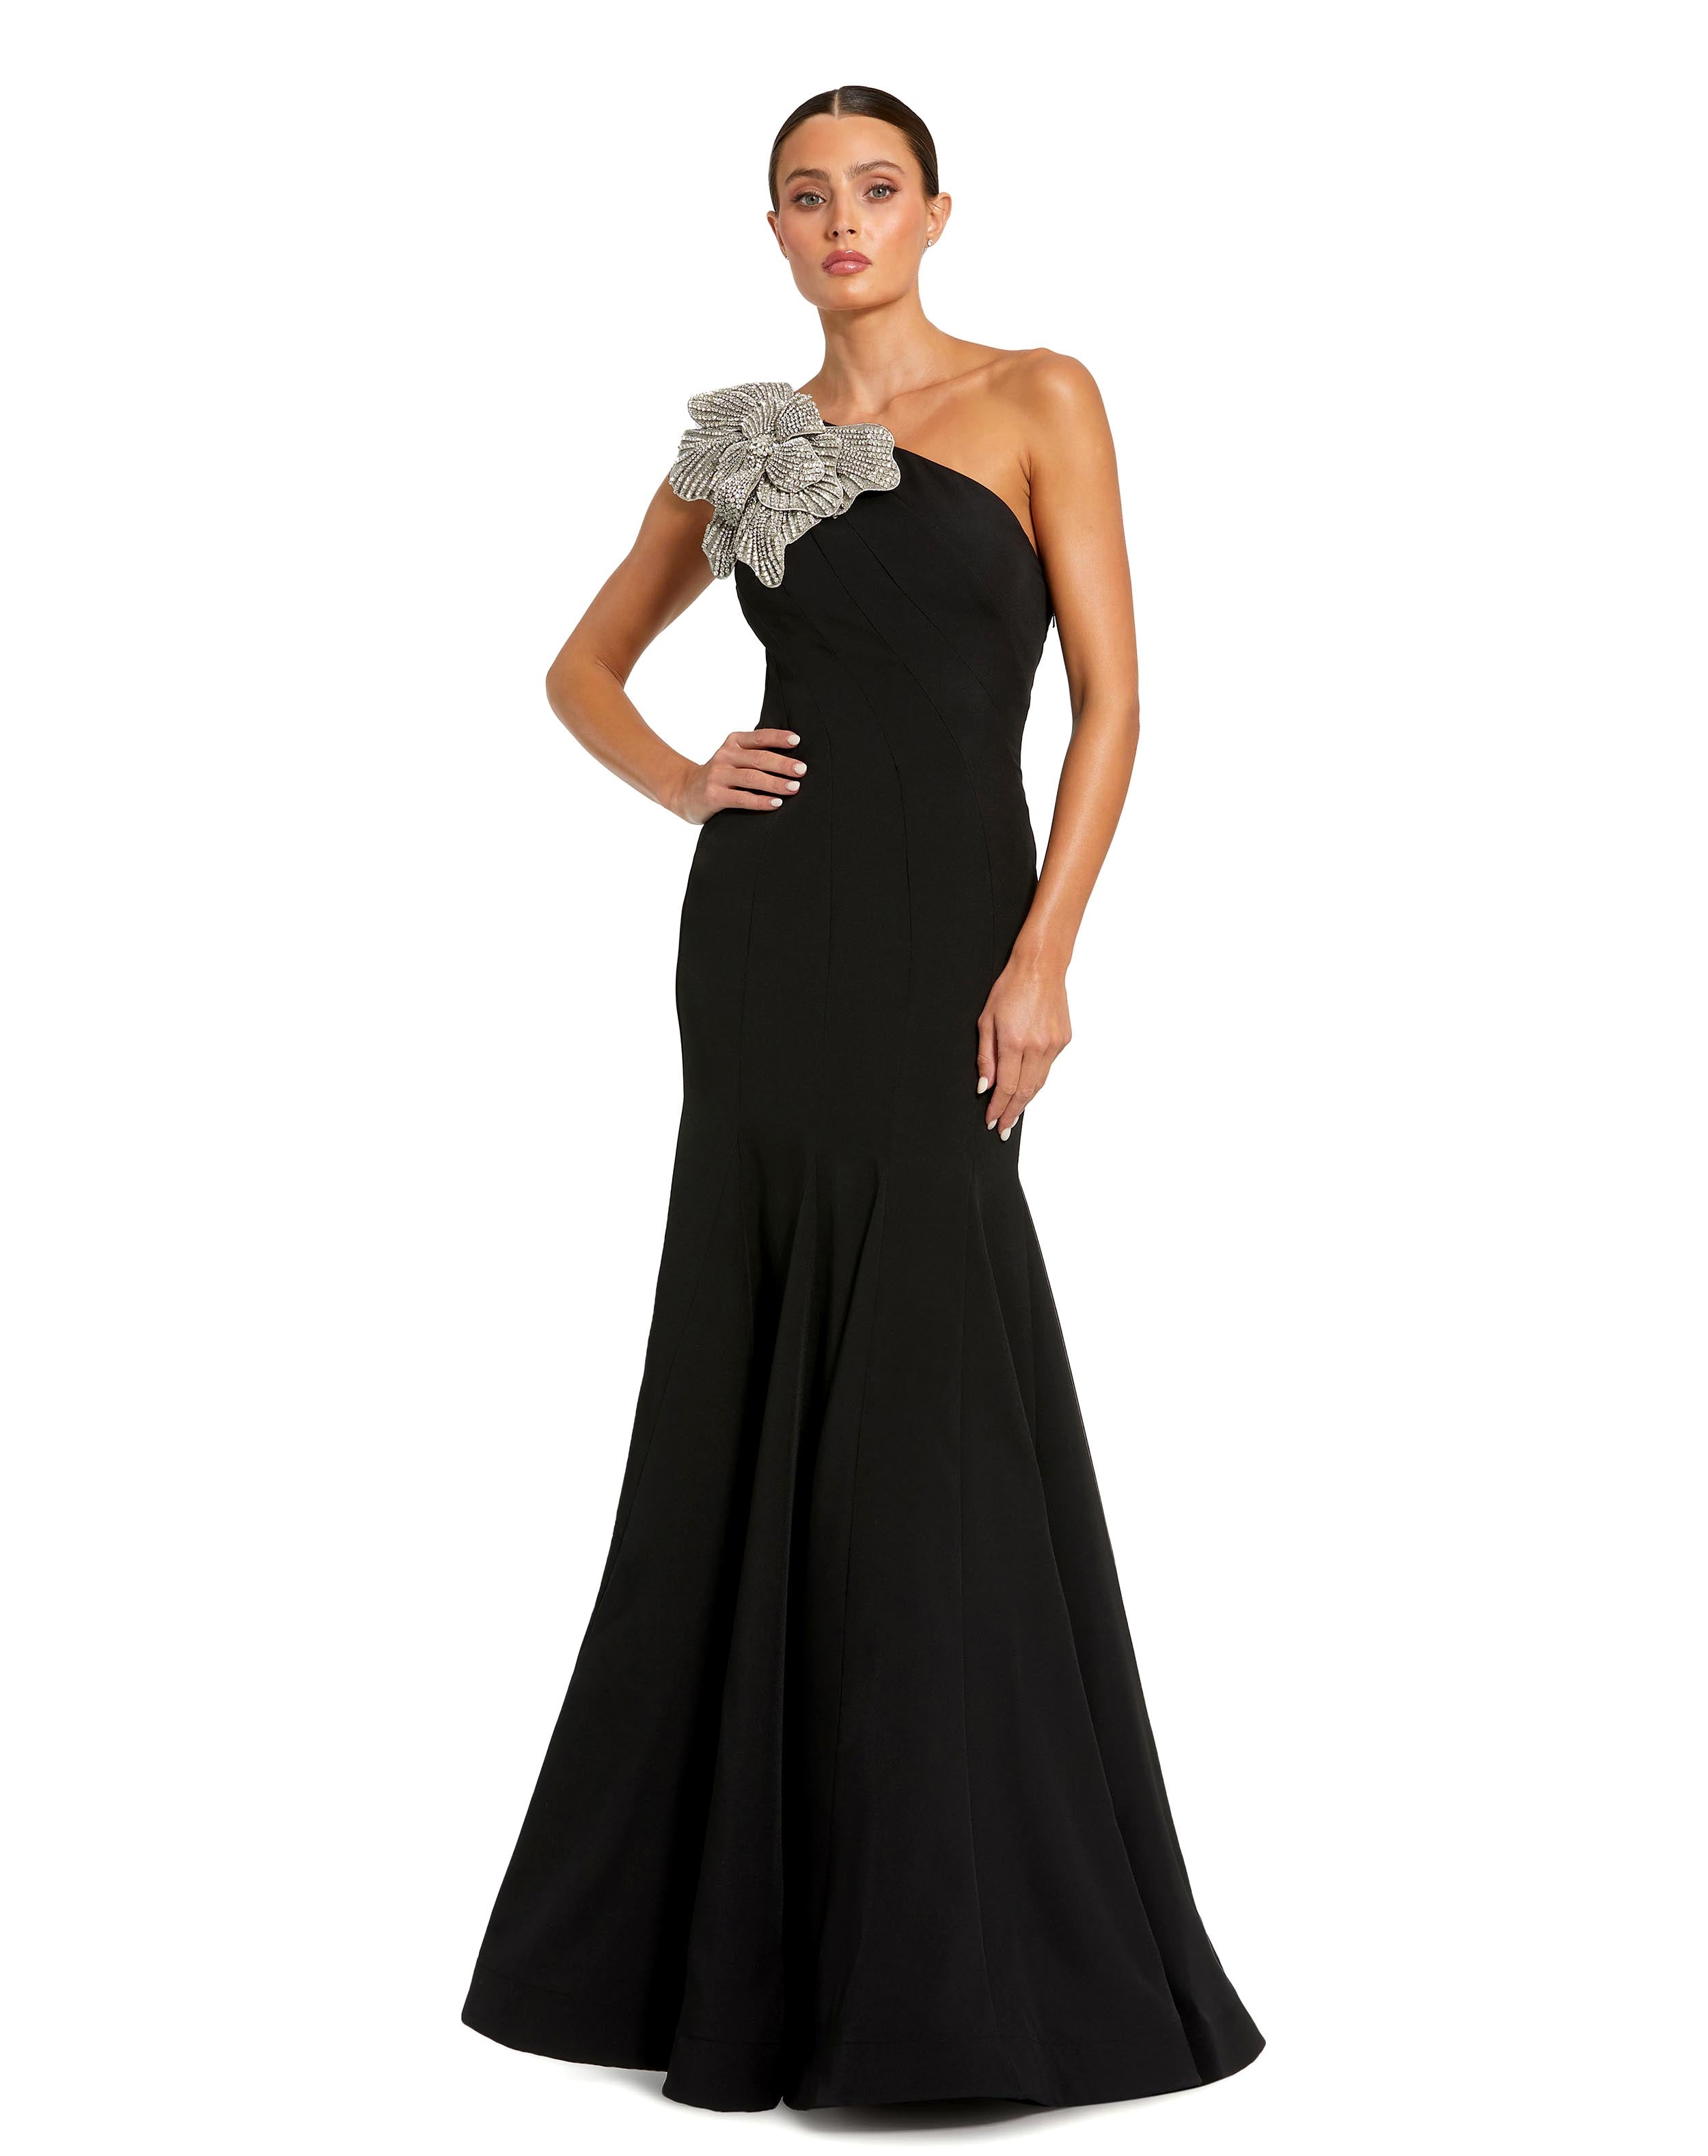 Popular Buy Partywear Gown Online, Latest Party Wear Gowns Online Shopping  | Page 12